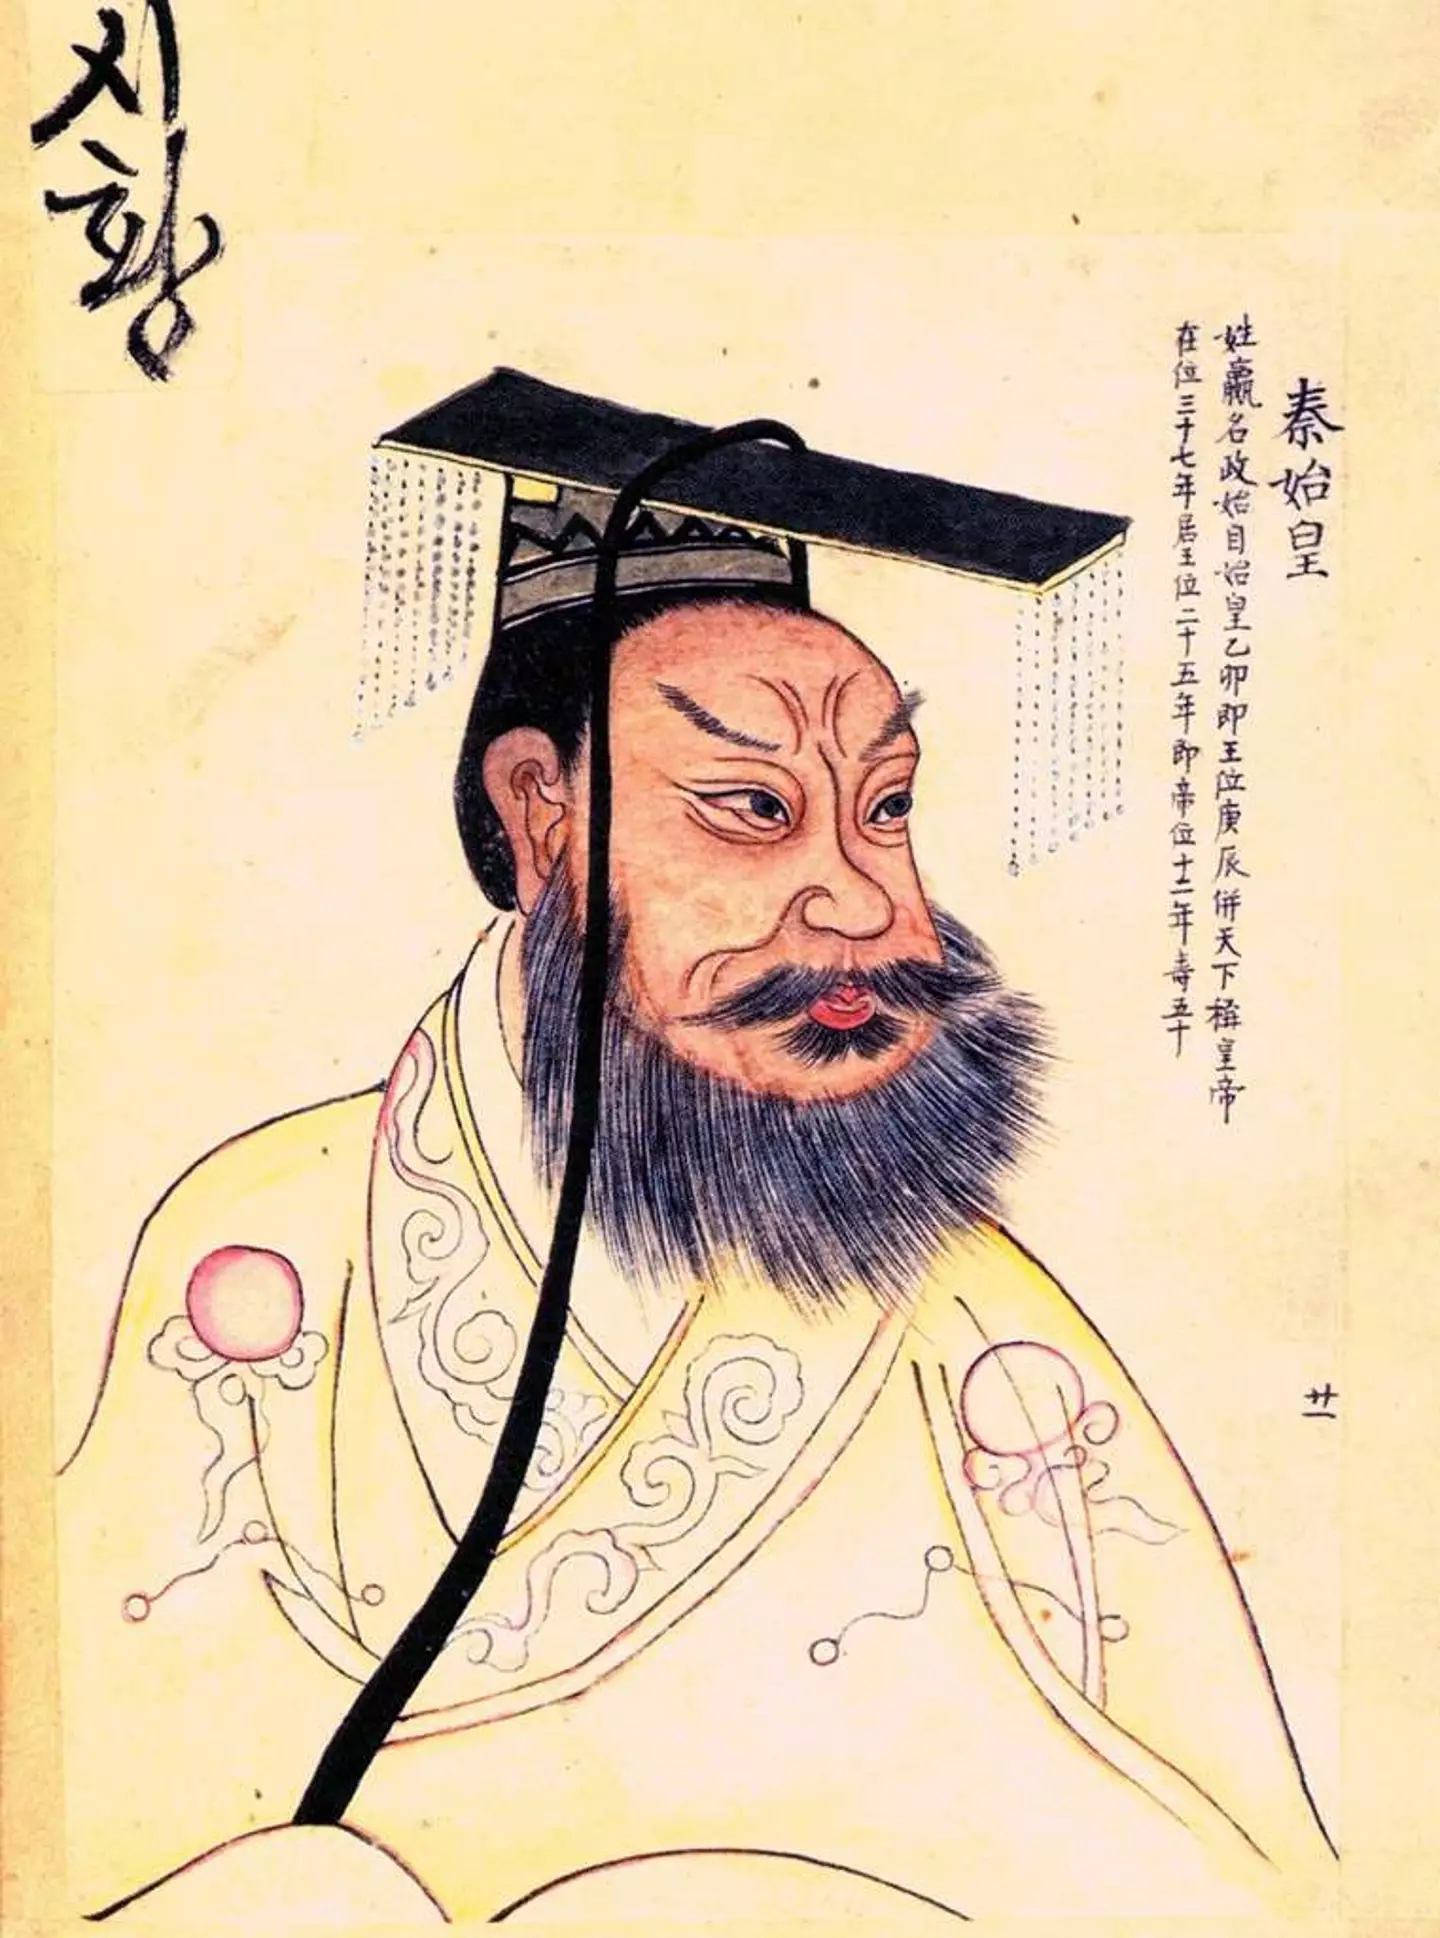 Qin Xi Huang was China's first emperor.